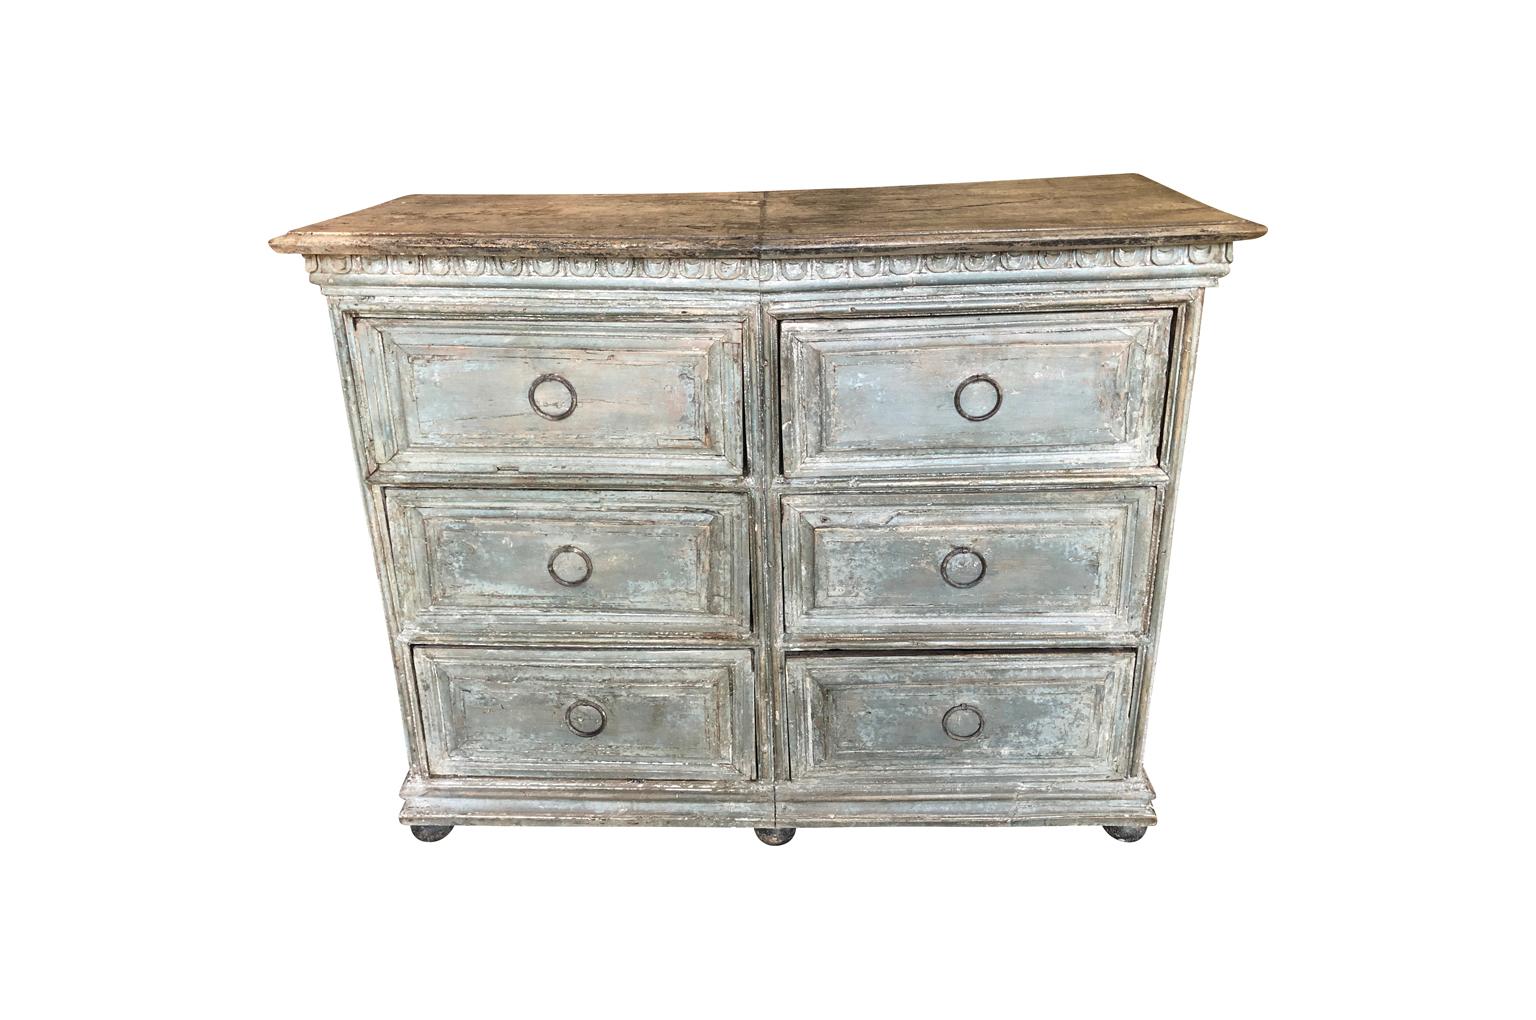 A very handsome 18th century Baroque commode from the Lombardi region of Italy. Wonderfully construction from painted wood with 6 drawers, dentilated detail raised on ball feet. Terrific finish and patina.